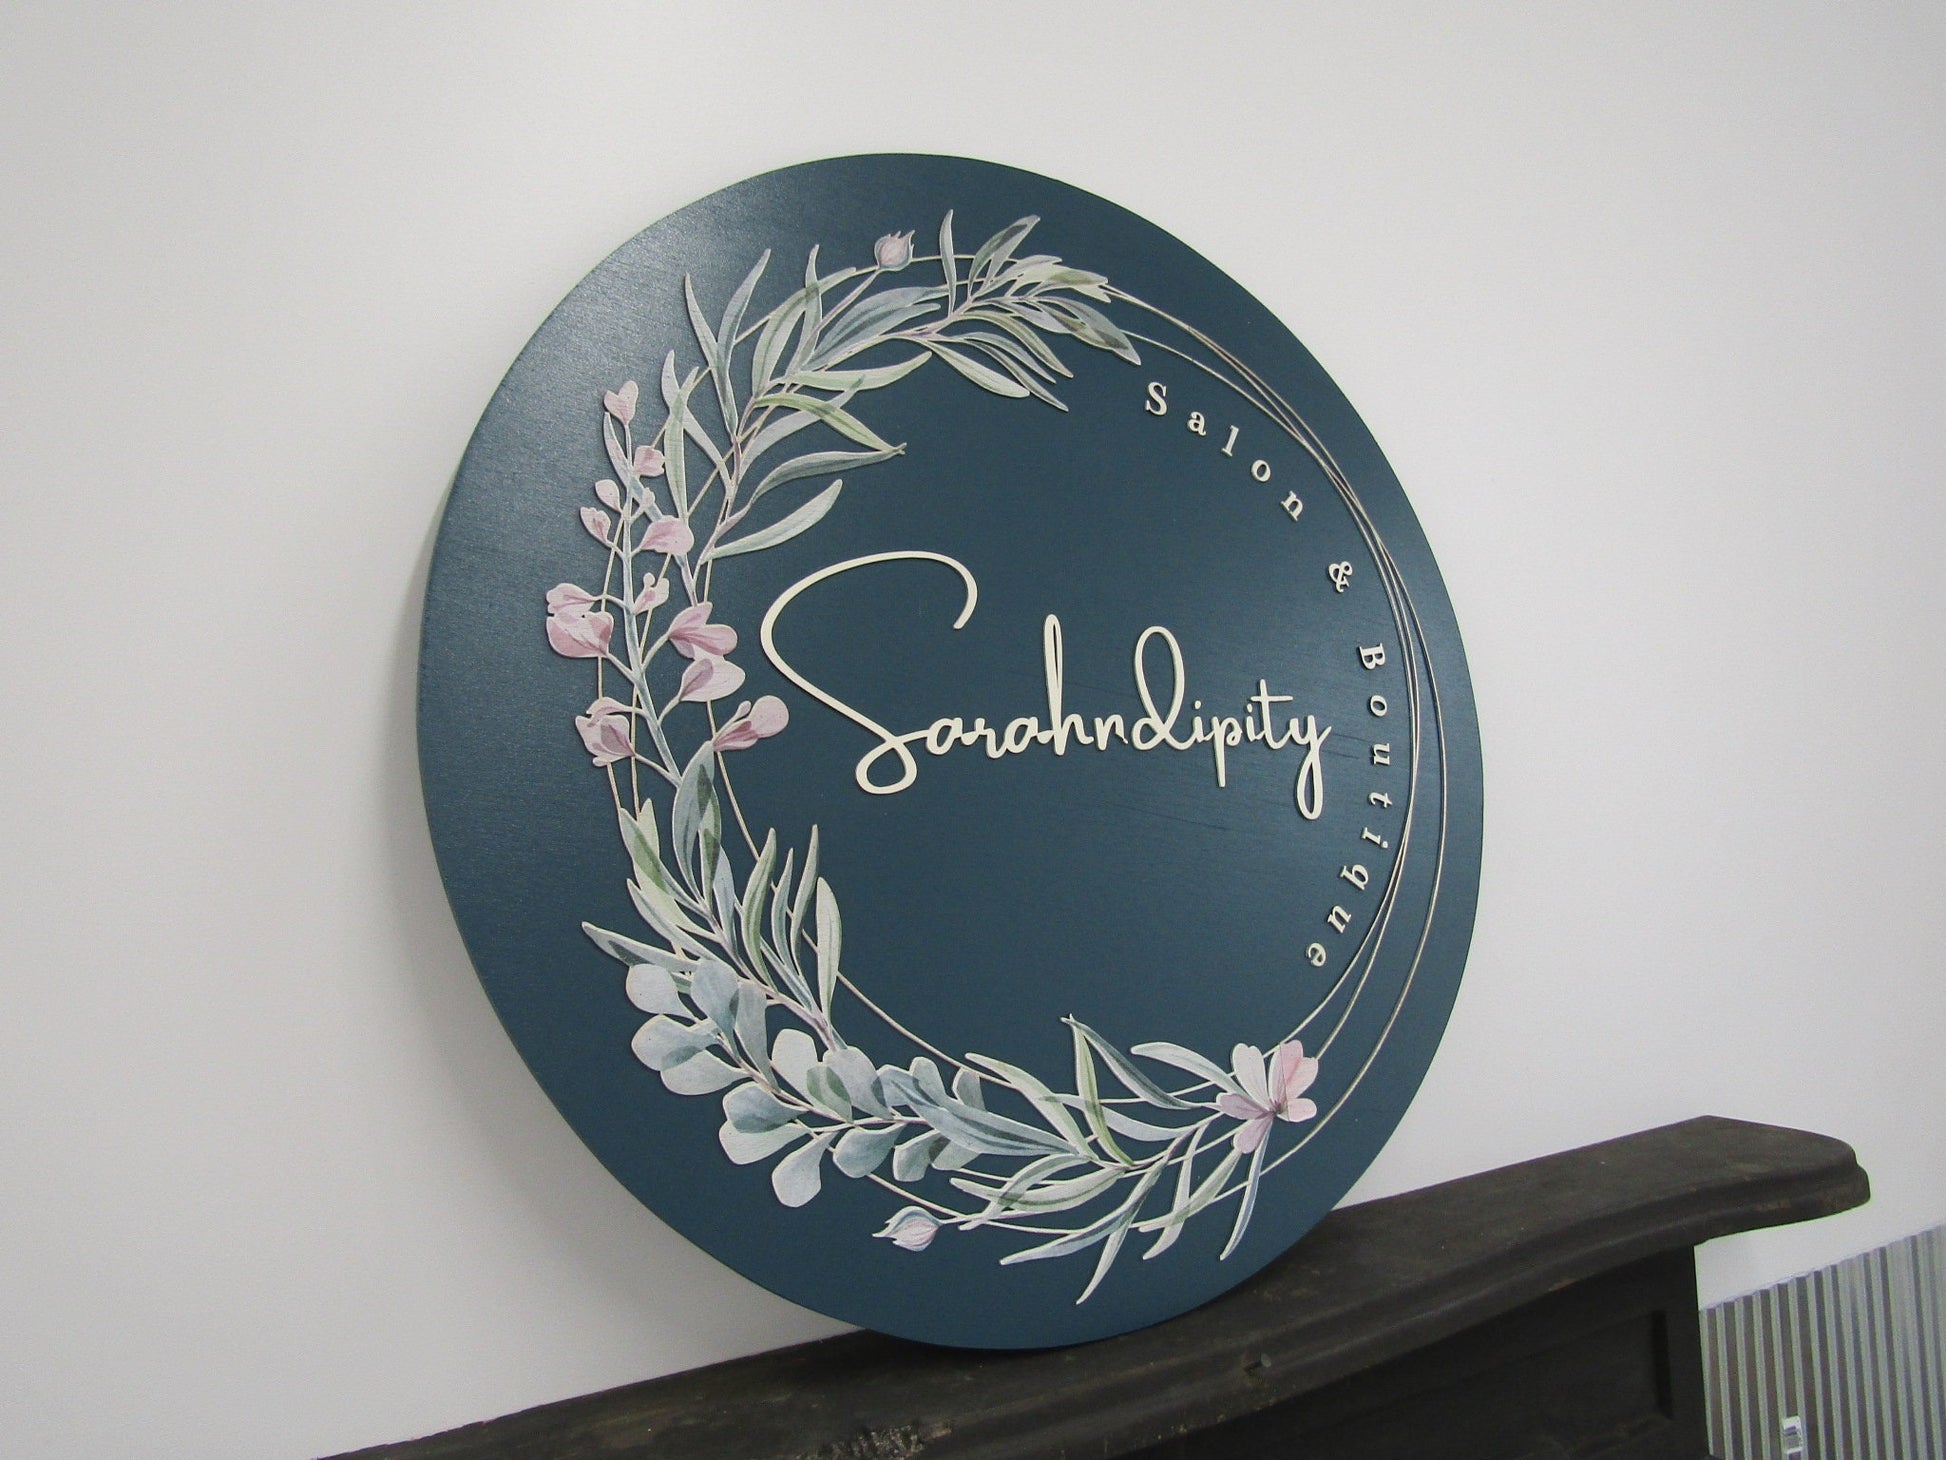 Custom Sign Round Business Commerical Signage Salon Boutique Made to Order Serendipity Store Front Small Shop Logo Circle Wooden Handmade